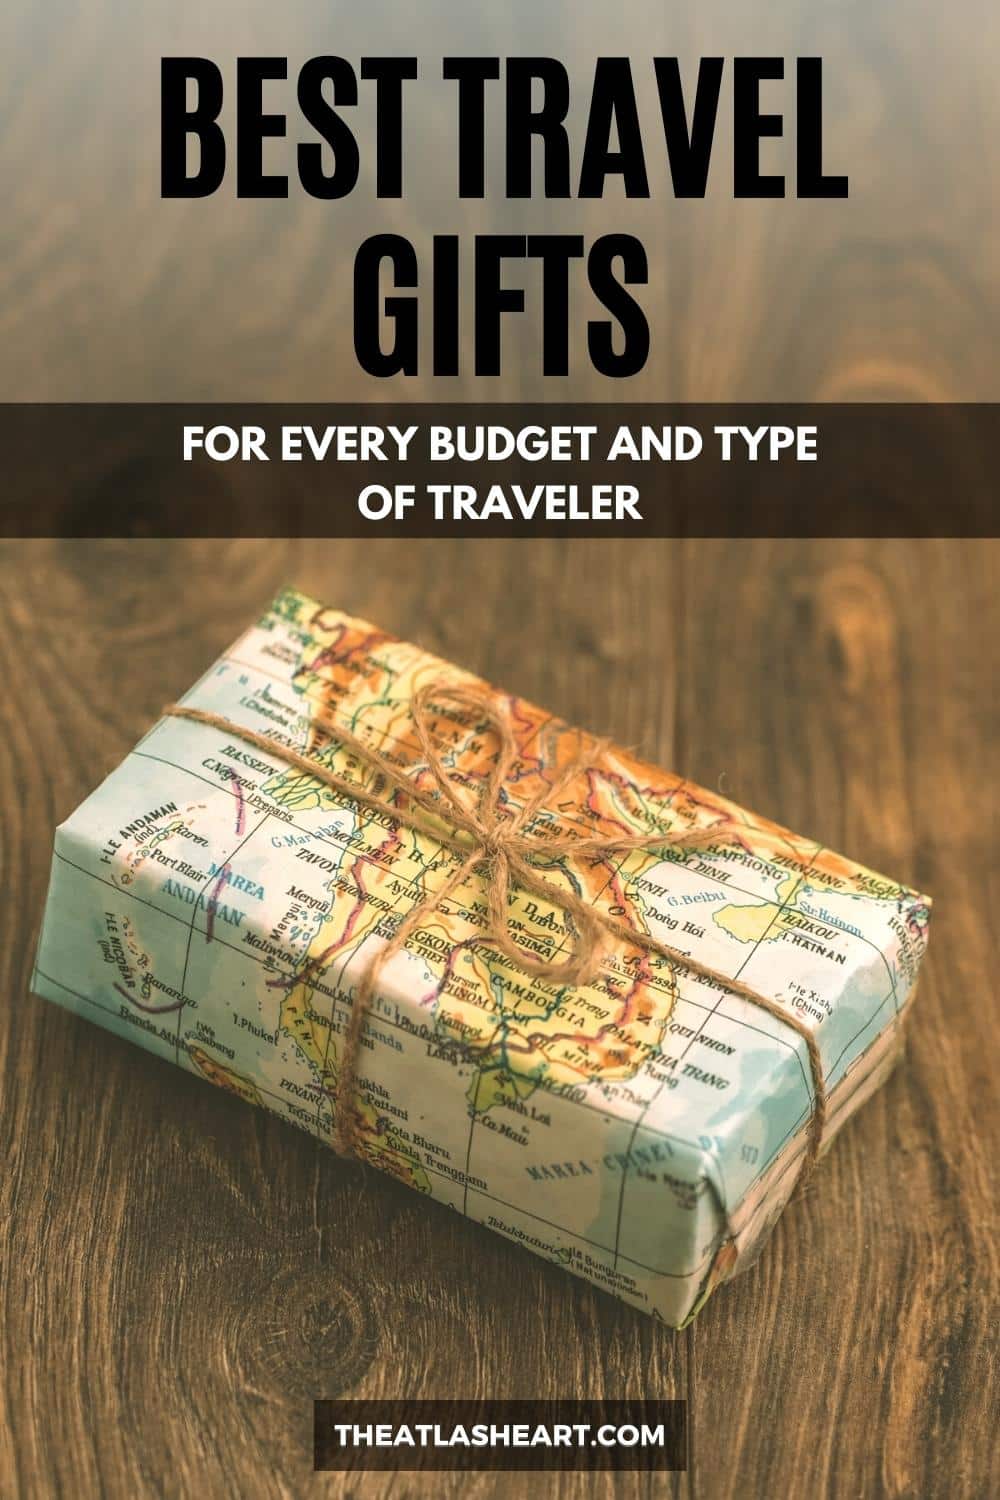 71 Best Travel Gifts for Every Budget and Type of Traveler